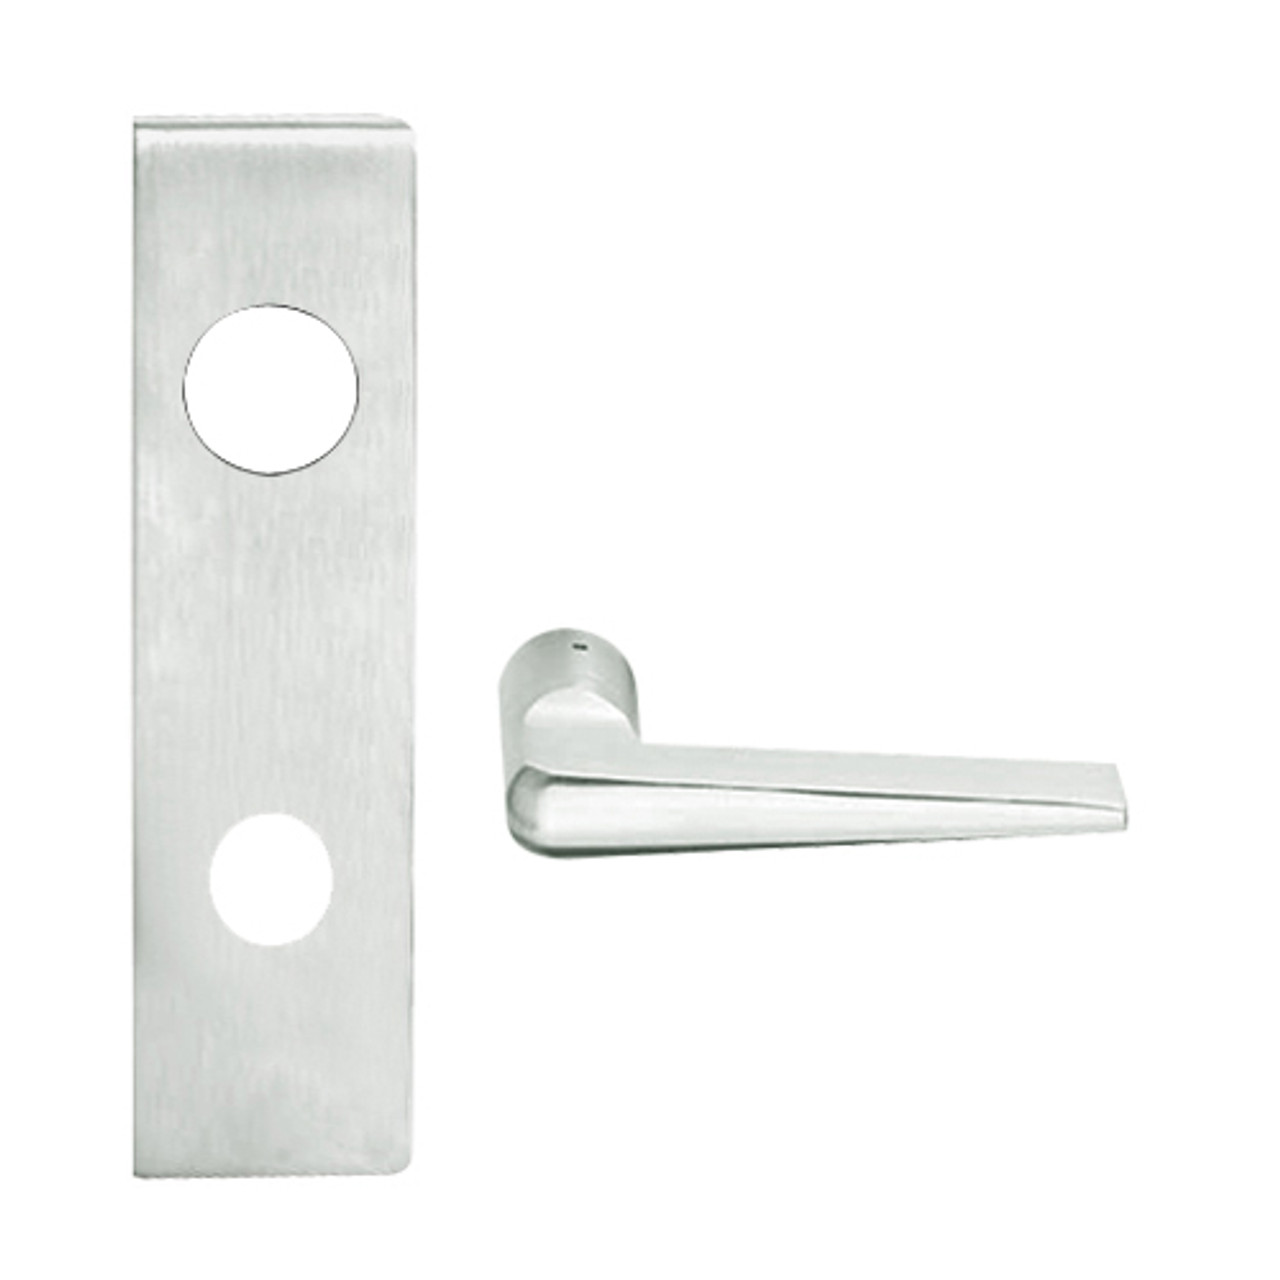 L9026J-05N-619 Schlage L Series Exit Lock with Cylinder Commercial Mortise Lock with 05 Cast Lever Design Prepped for FSIC in Satin Nickel